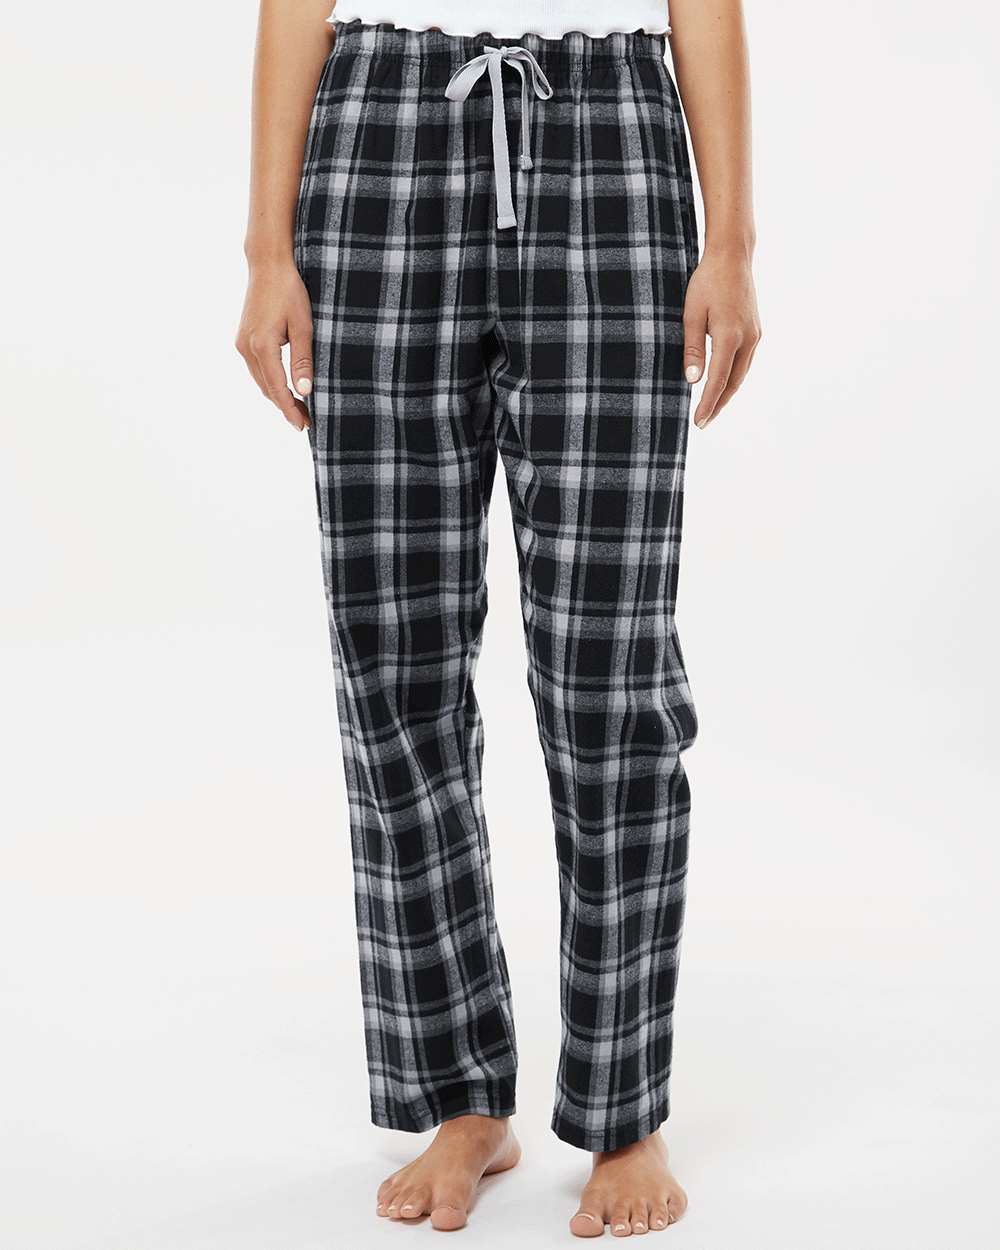 click to view Heritage Black Plaid